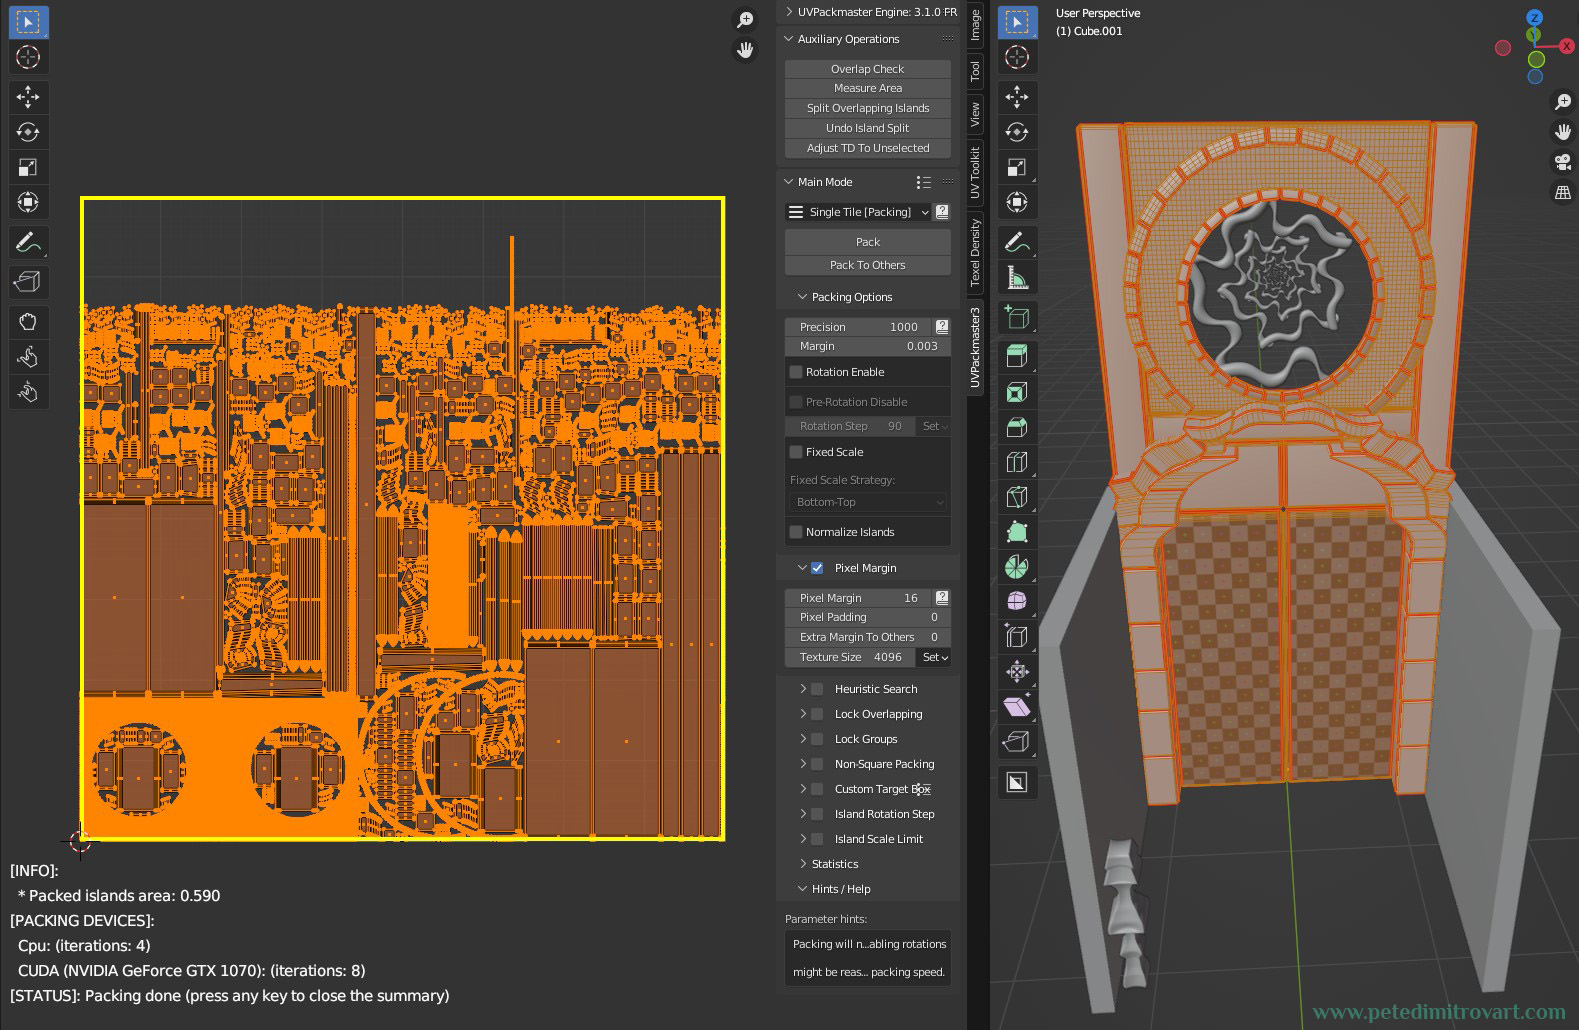 Blender screenshot where the screen is split into two. To the left is a UV Layout screen. To the right is Modelling Layout screen. On the left is seen the result of a UVPackmaster3 Addon, showing uv shells overlaid on an uv quadrant.